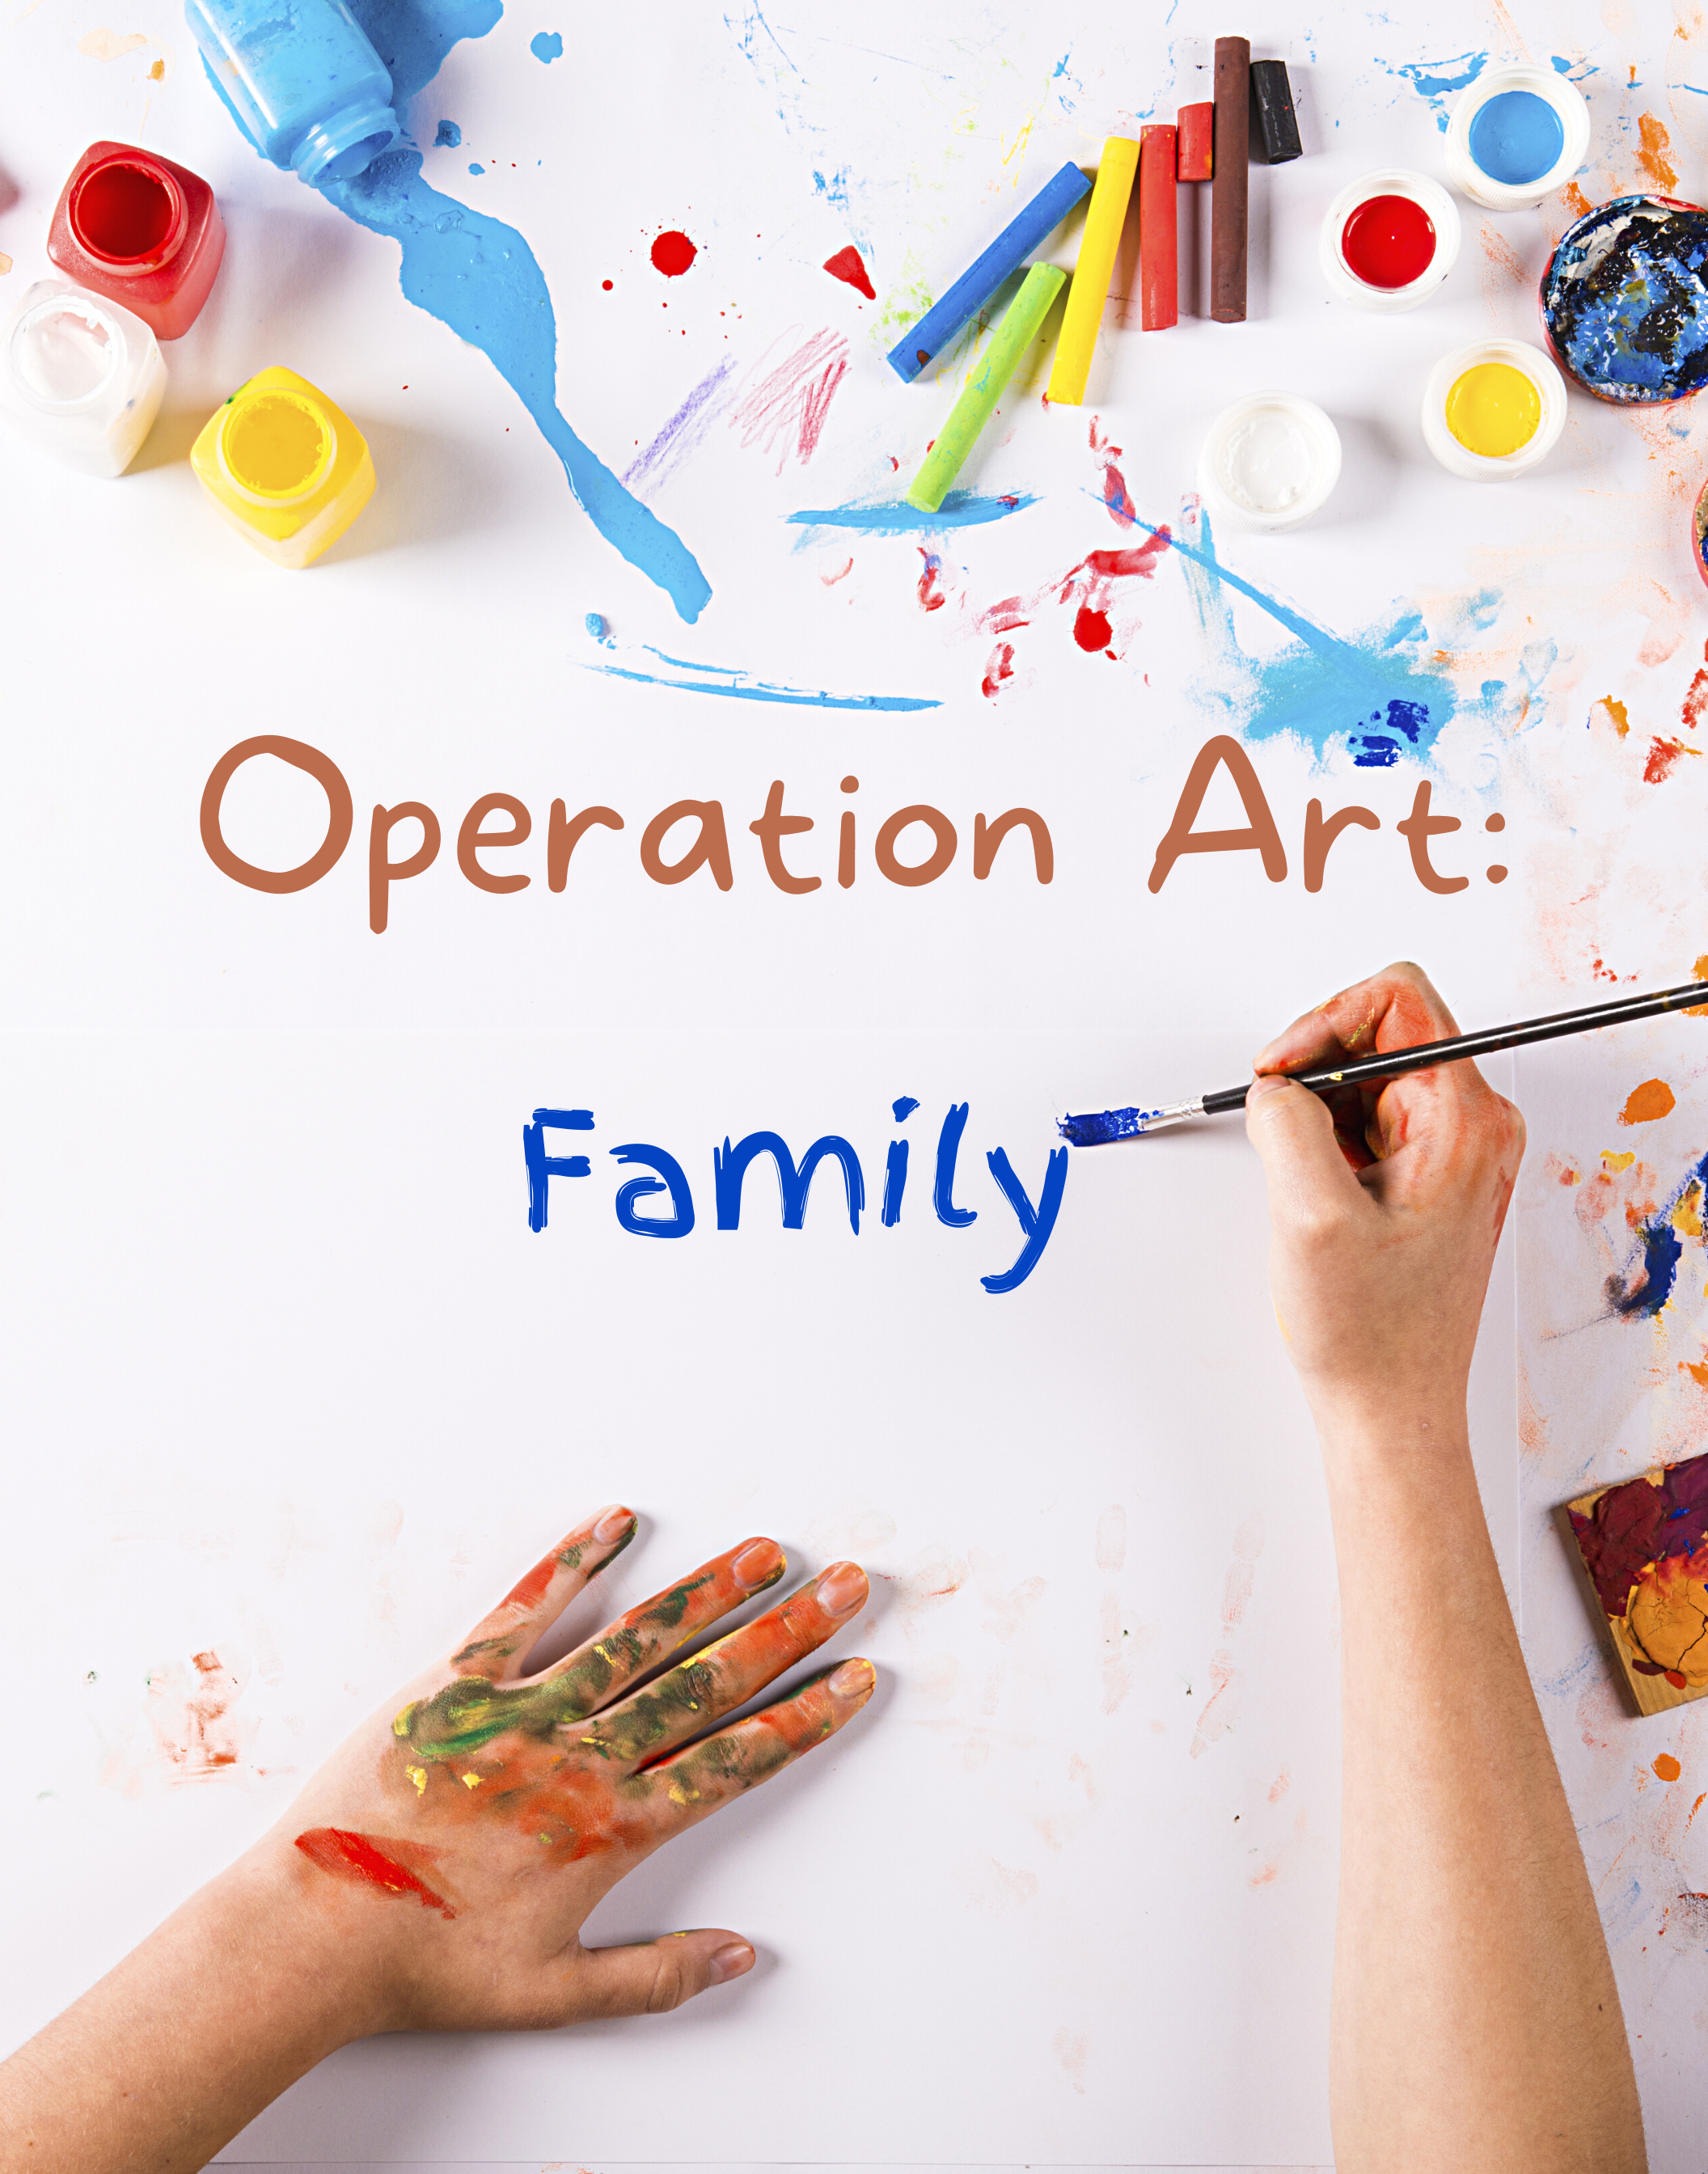 Operation Art: Family poster with messy hands surrounded by paint